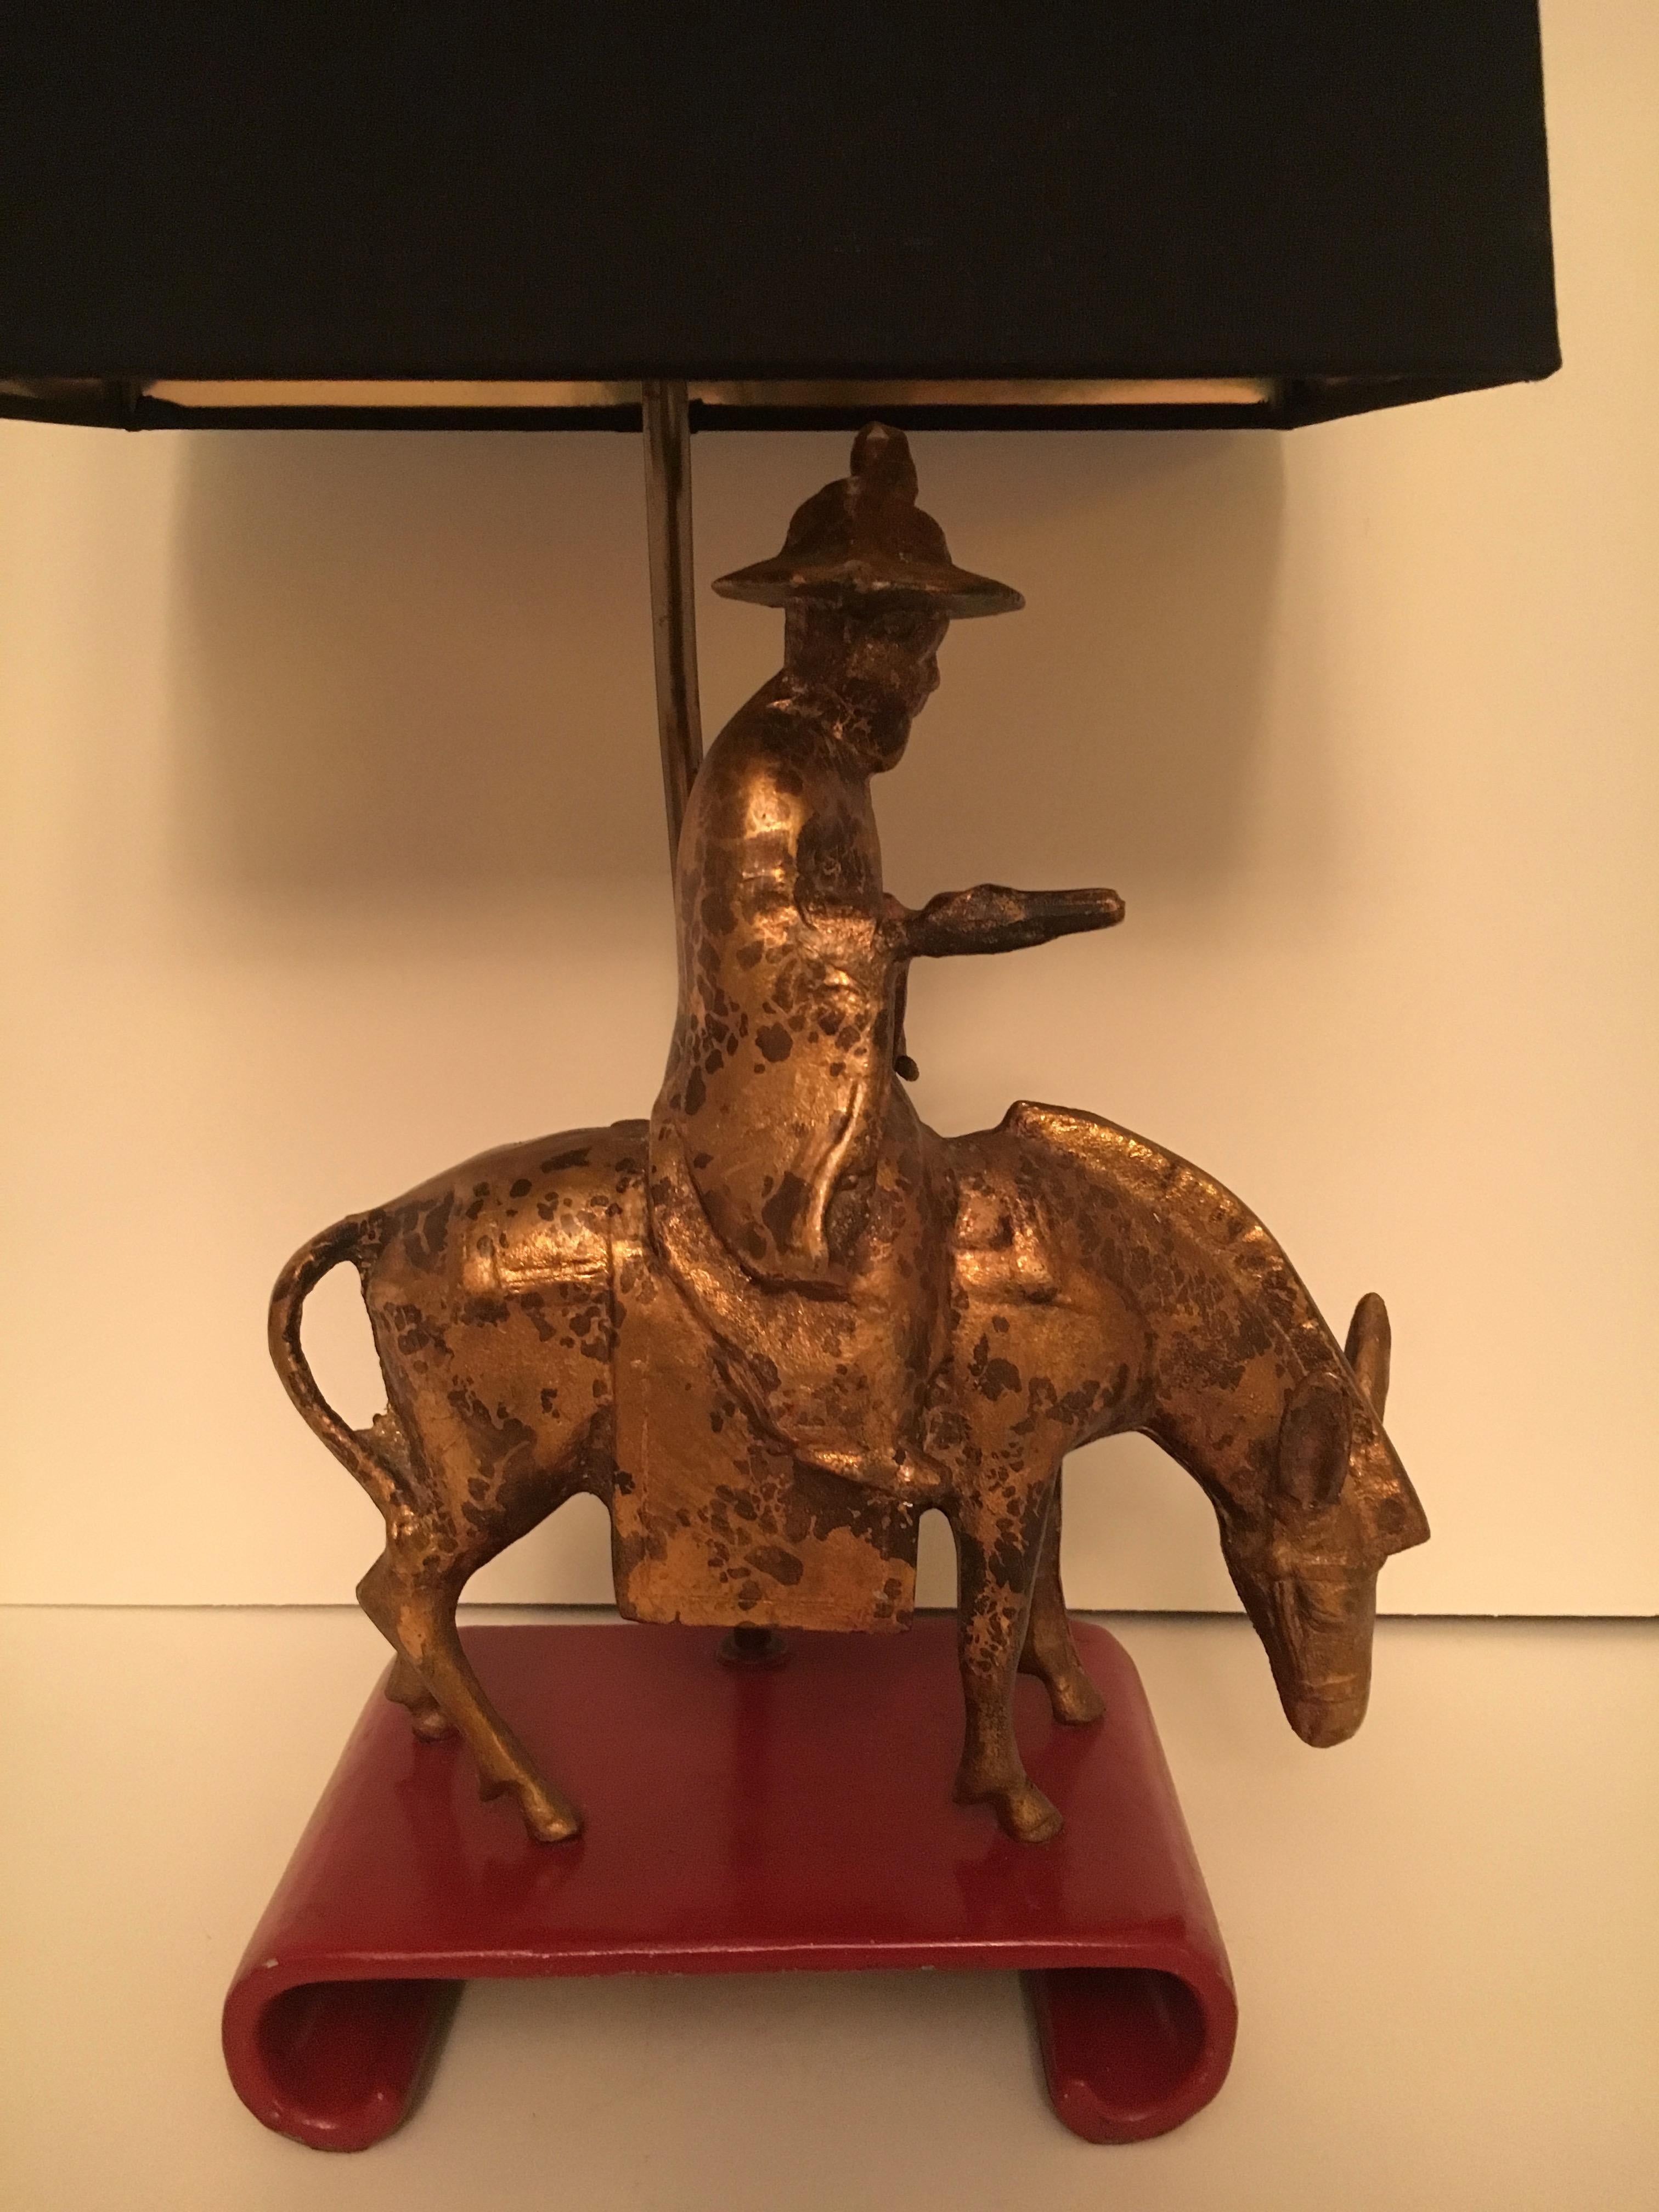 Gilt Asian figure on a horse or mule displayed a red lacquered Asian platform. The lamp is extremely handsome and with a very good energy. We have placed a 'black out' shade lined in gold for atmosphere lighting. The finial is a carved resin or bone